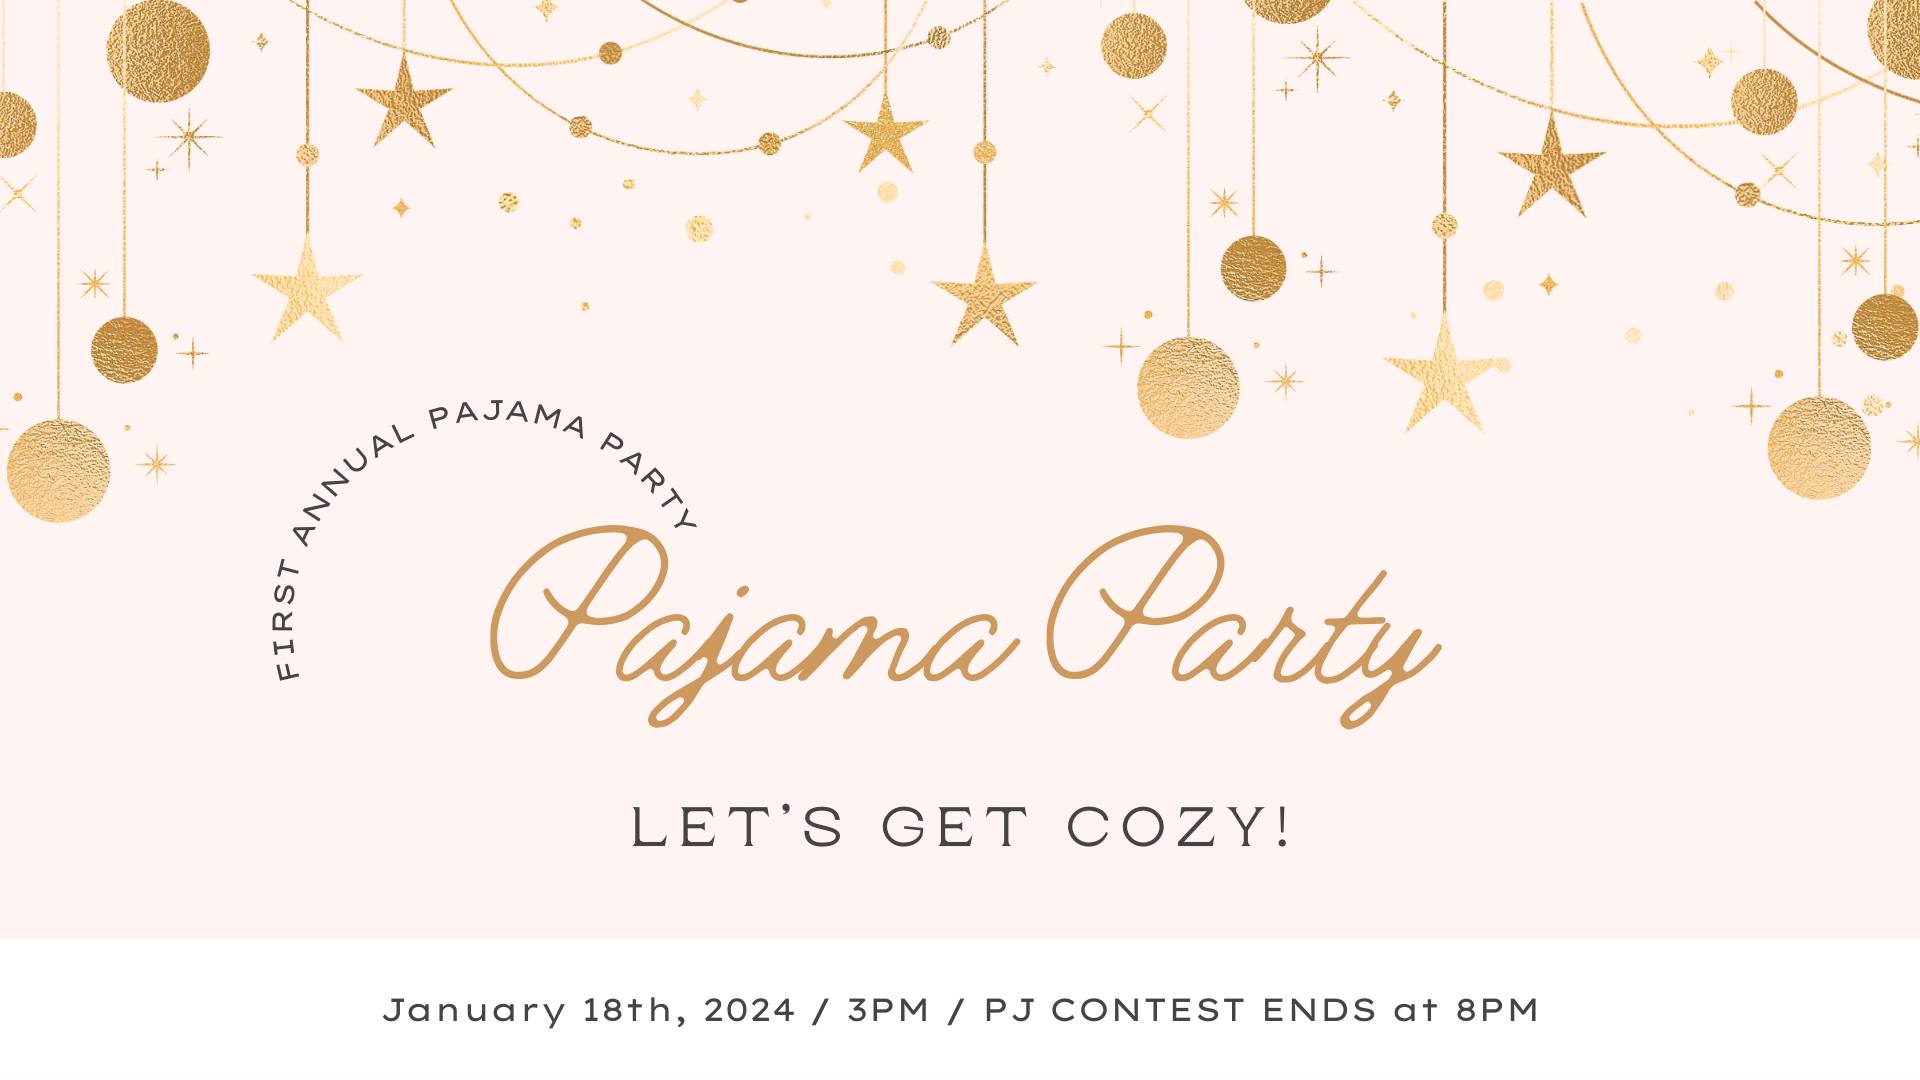 Grapes and Grains Pajama Party/ Contest